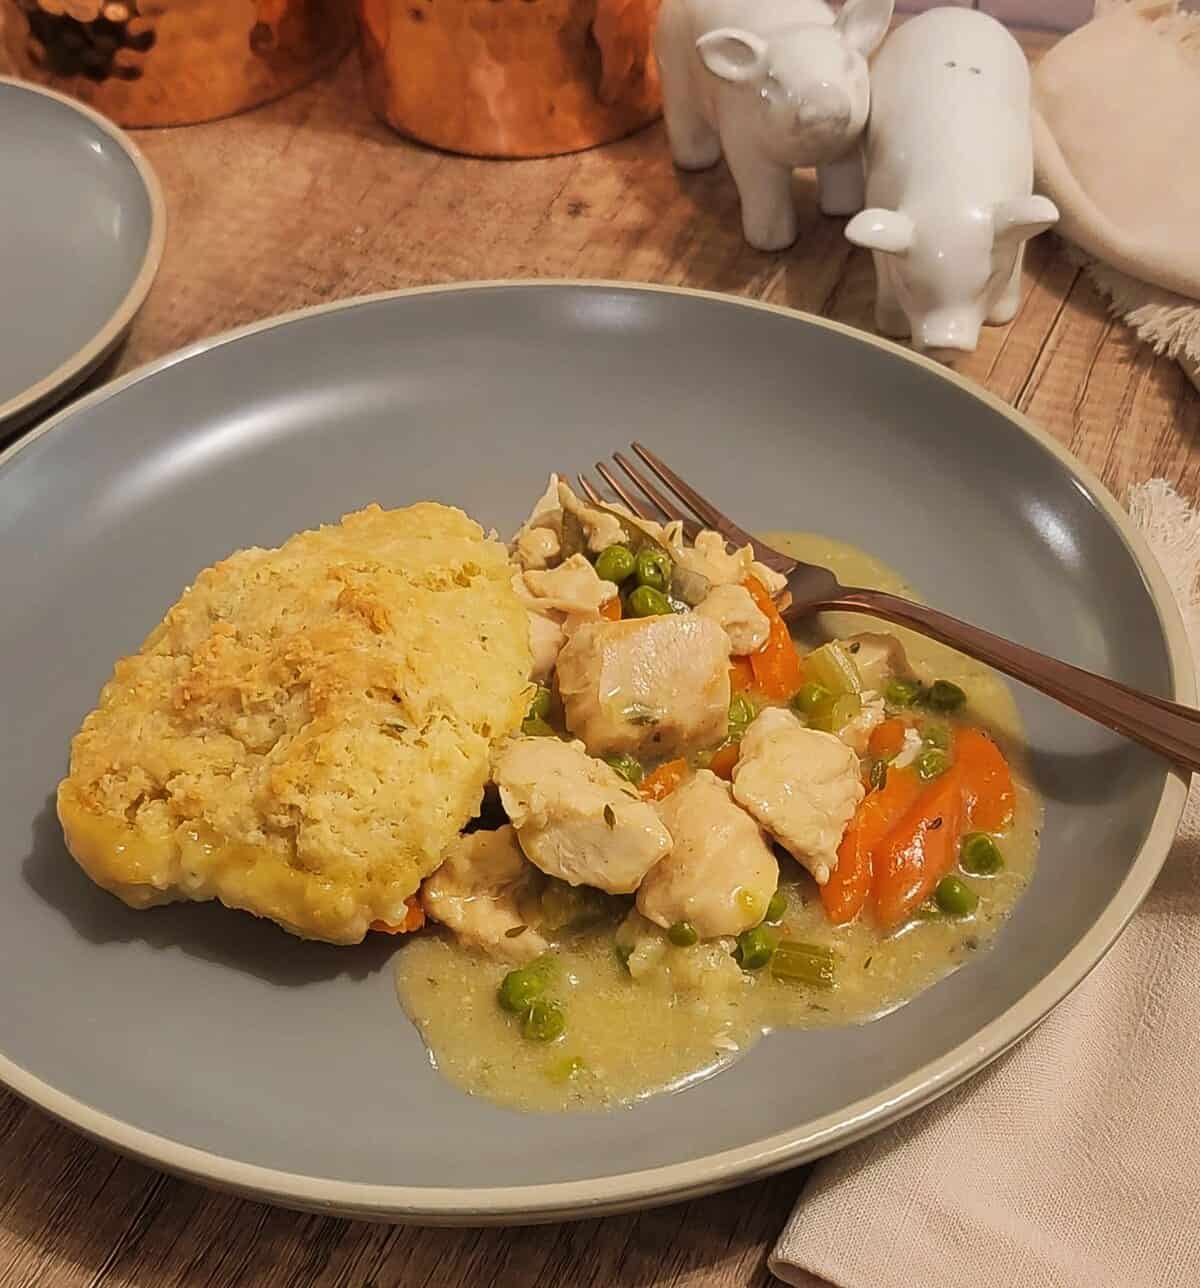 a plate of finished chicken cobbler with a fork, gravy and chunks of cooked chicken with vegetables, rosemary biscuit topping.